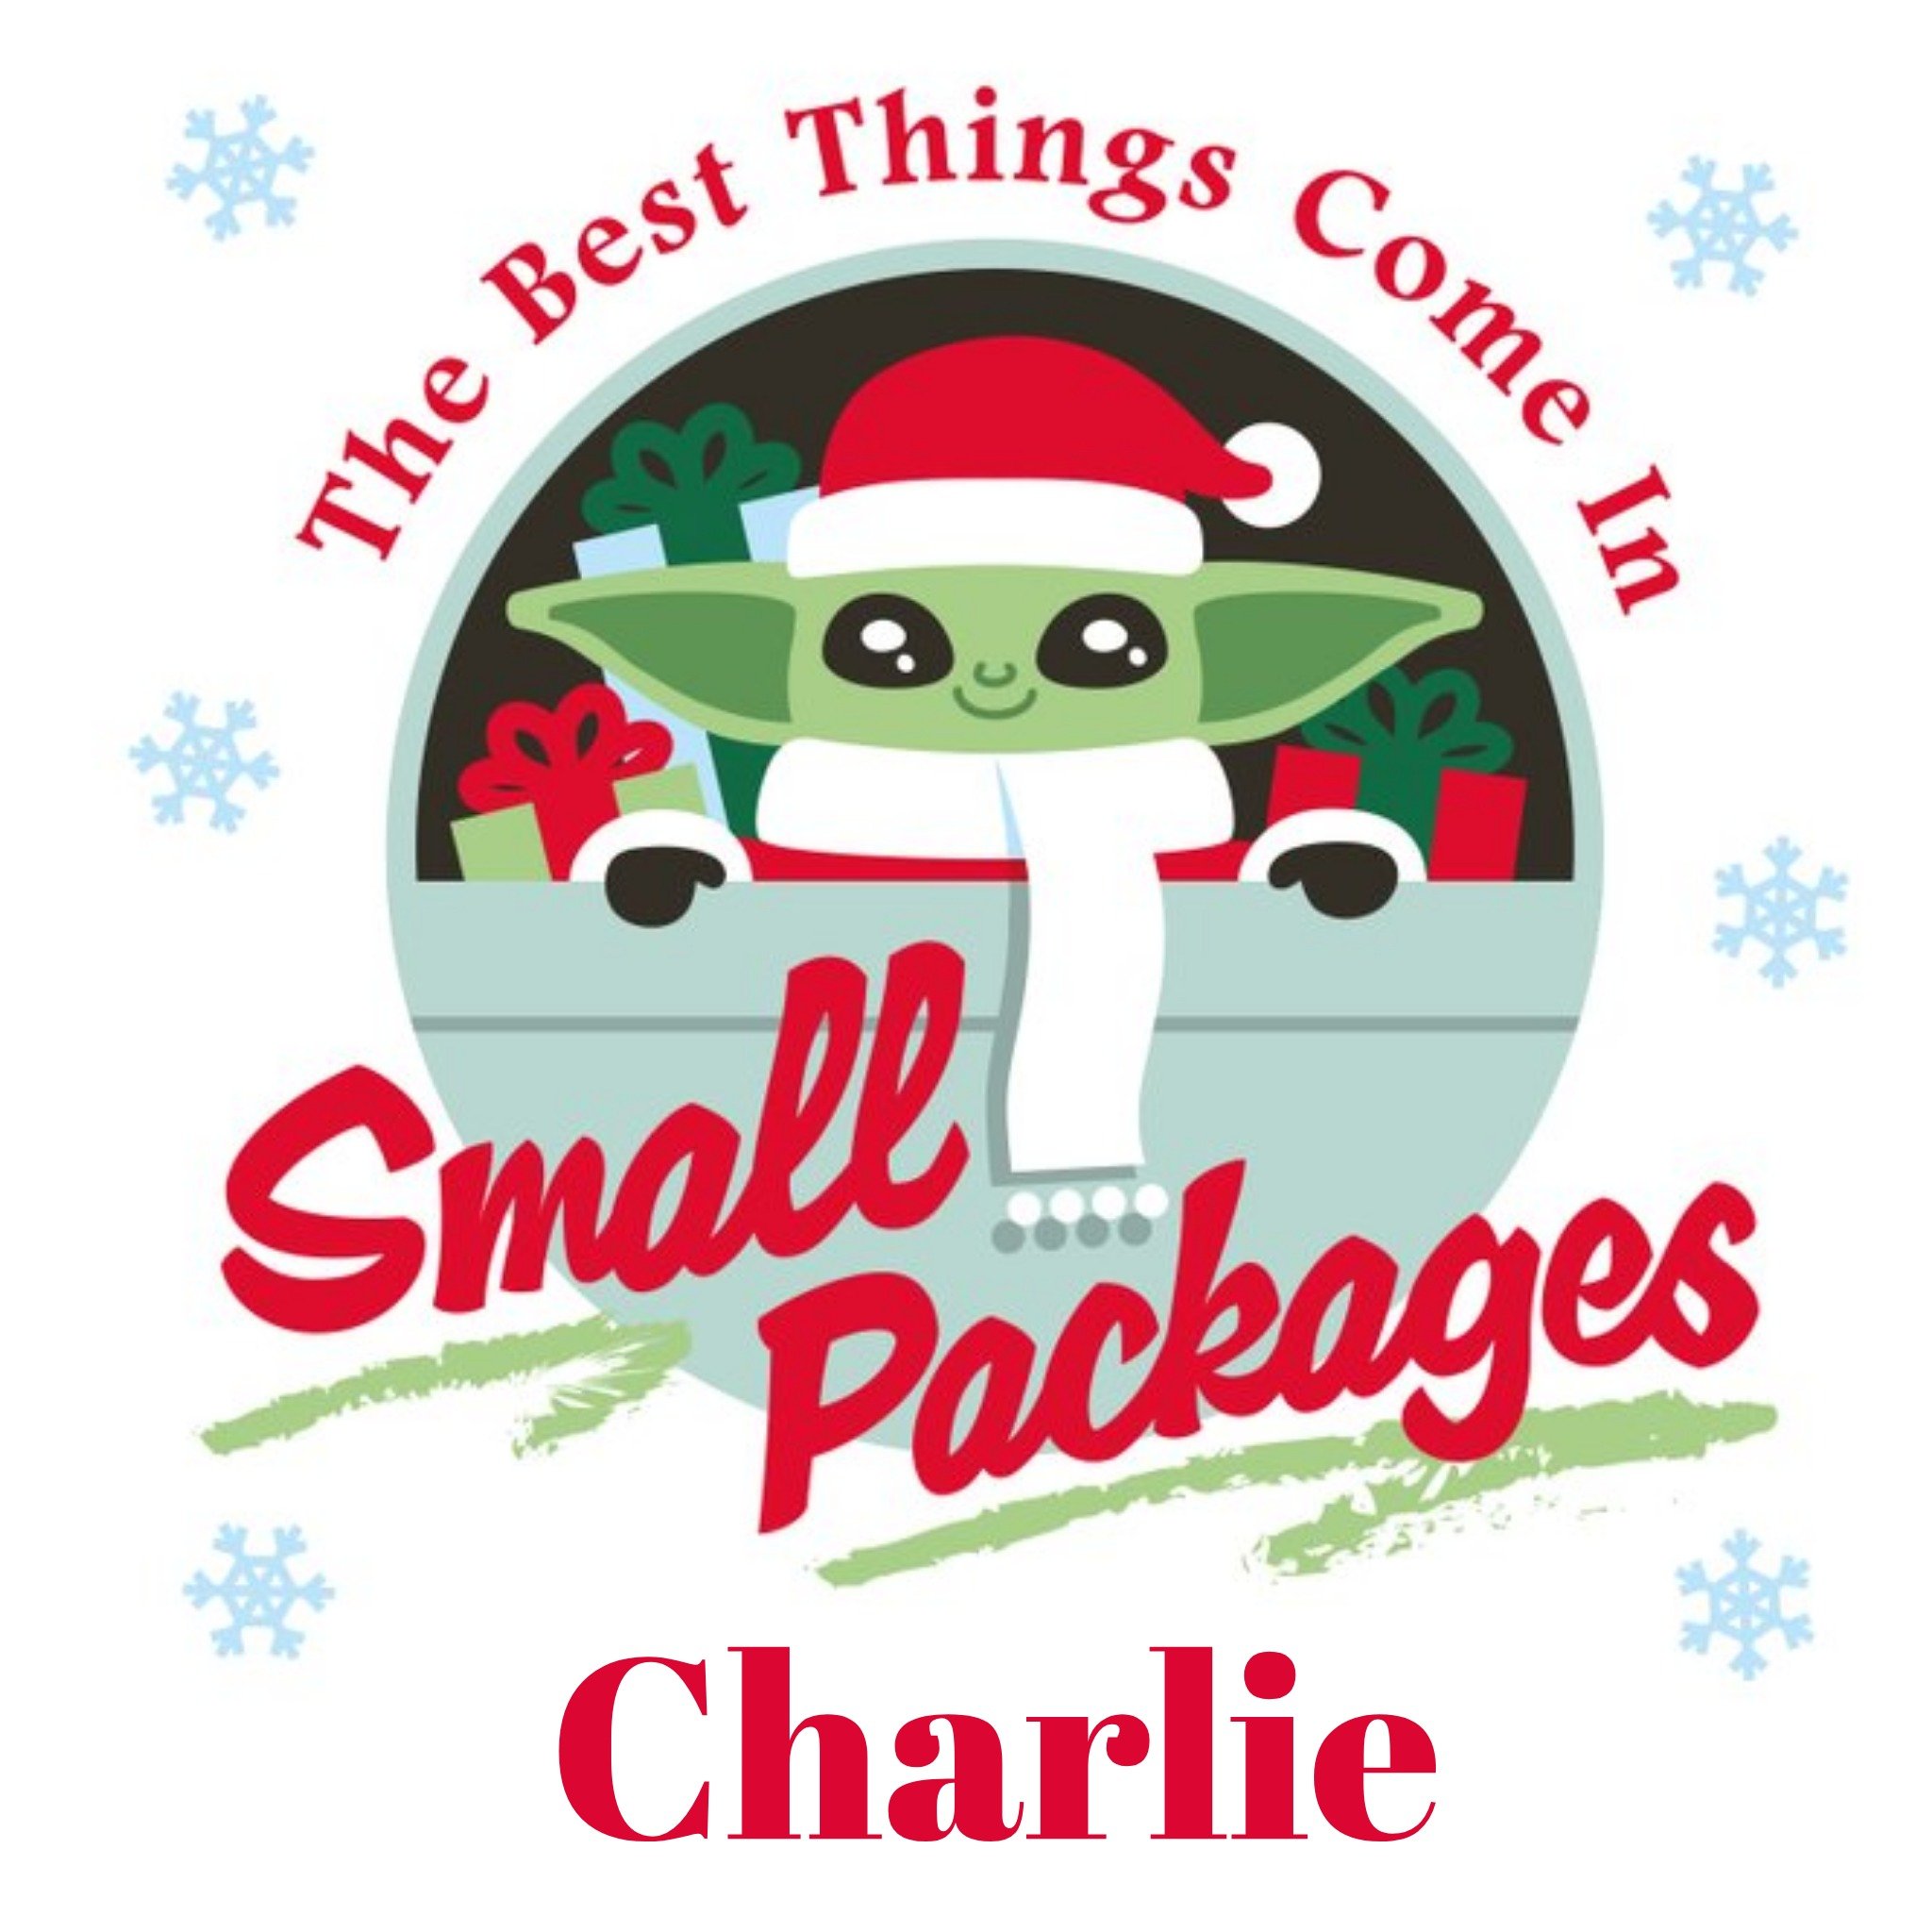 Disney Grogu The Best Things Come In Small Packages Christmas Card, Large